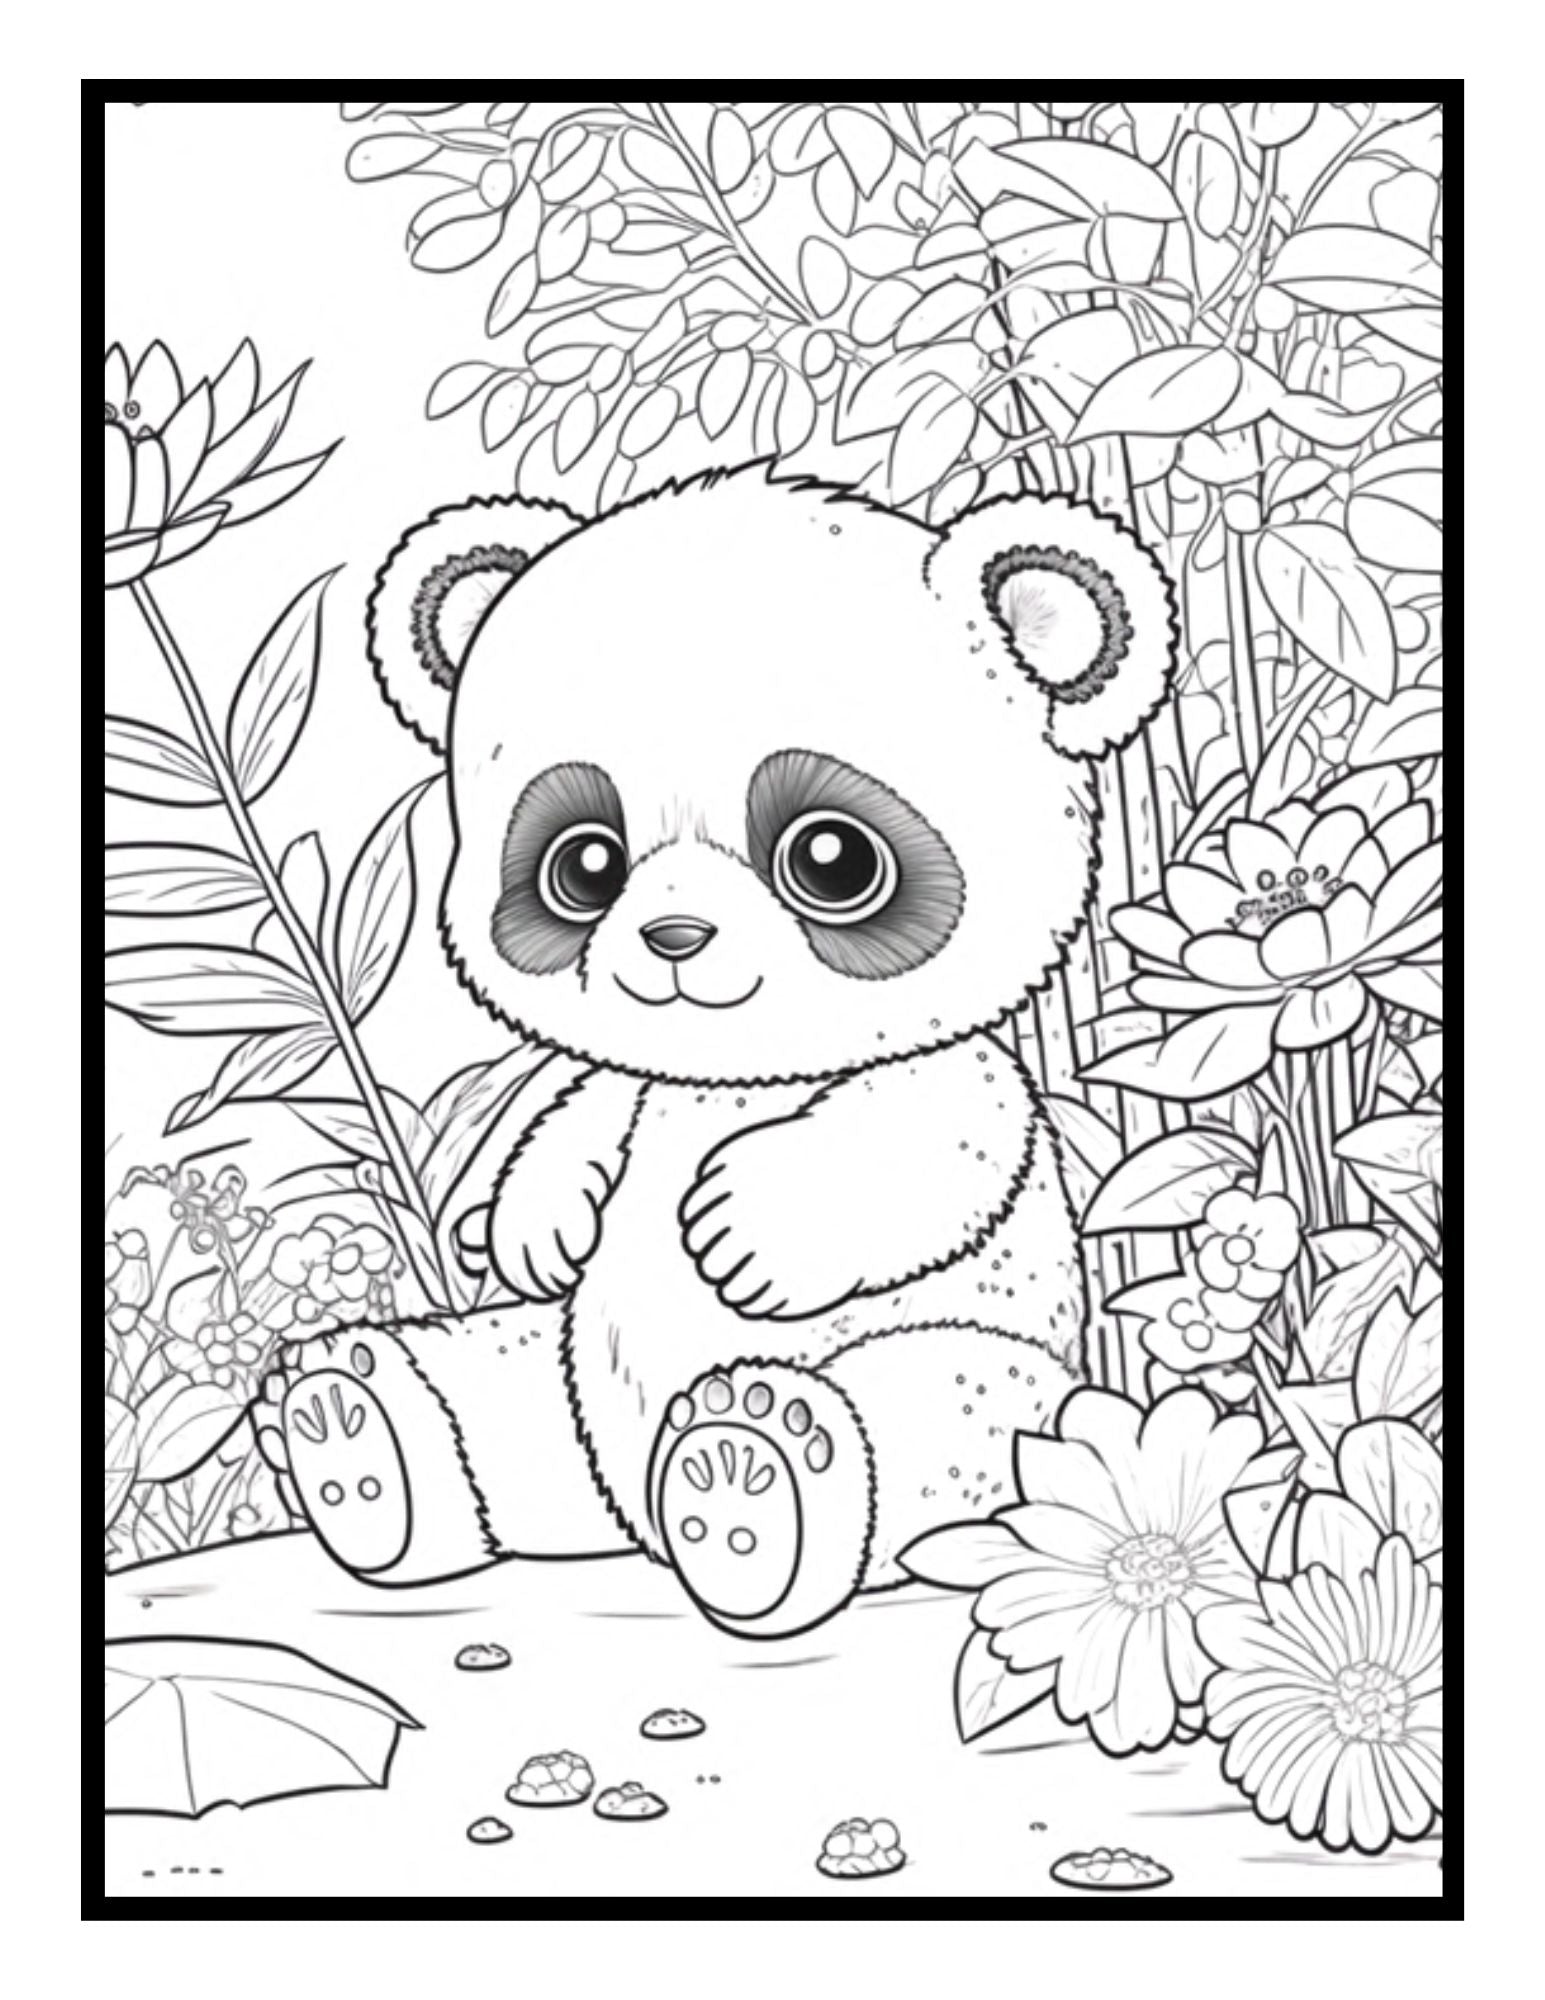 Cute Baby Panda Coloring Book For Adults